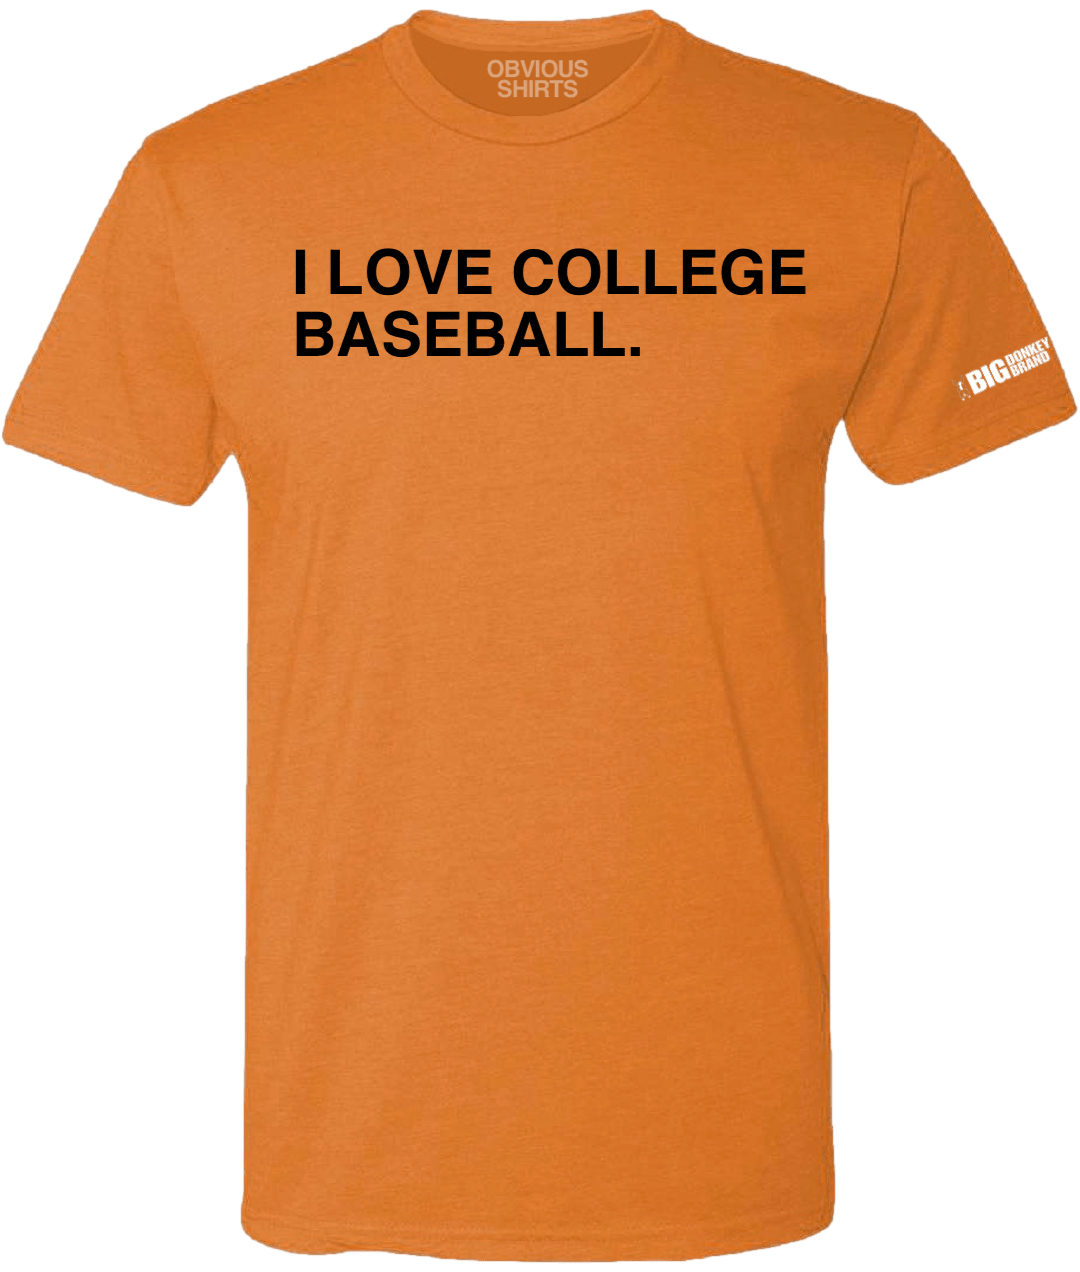 I LOVE COLLEGE BASEBALL. (CUSTOMIZE) - OBVIOUS SHIRTS